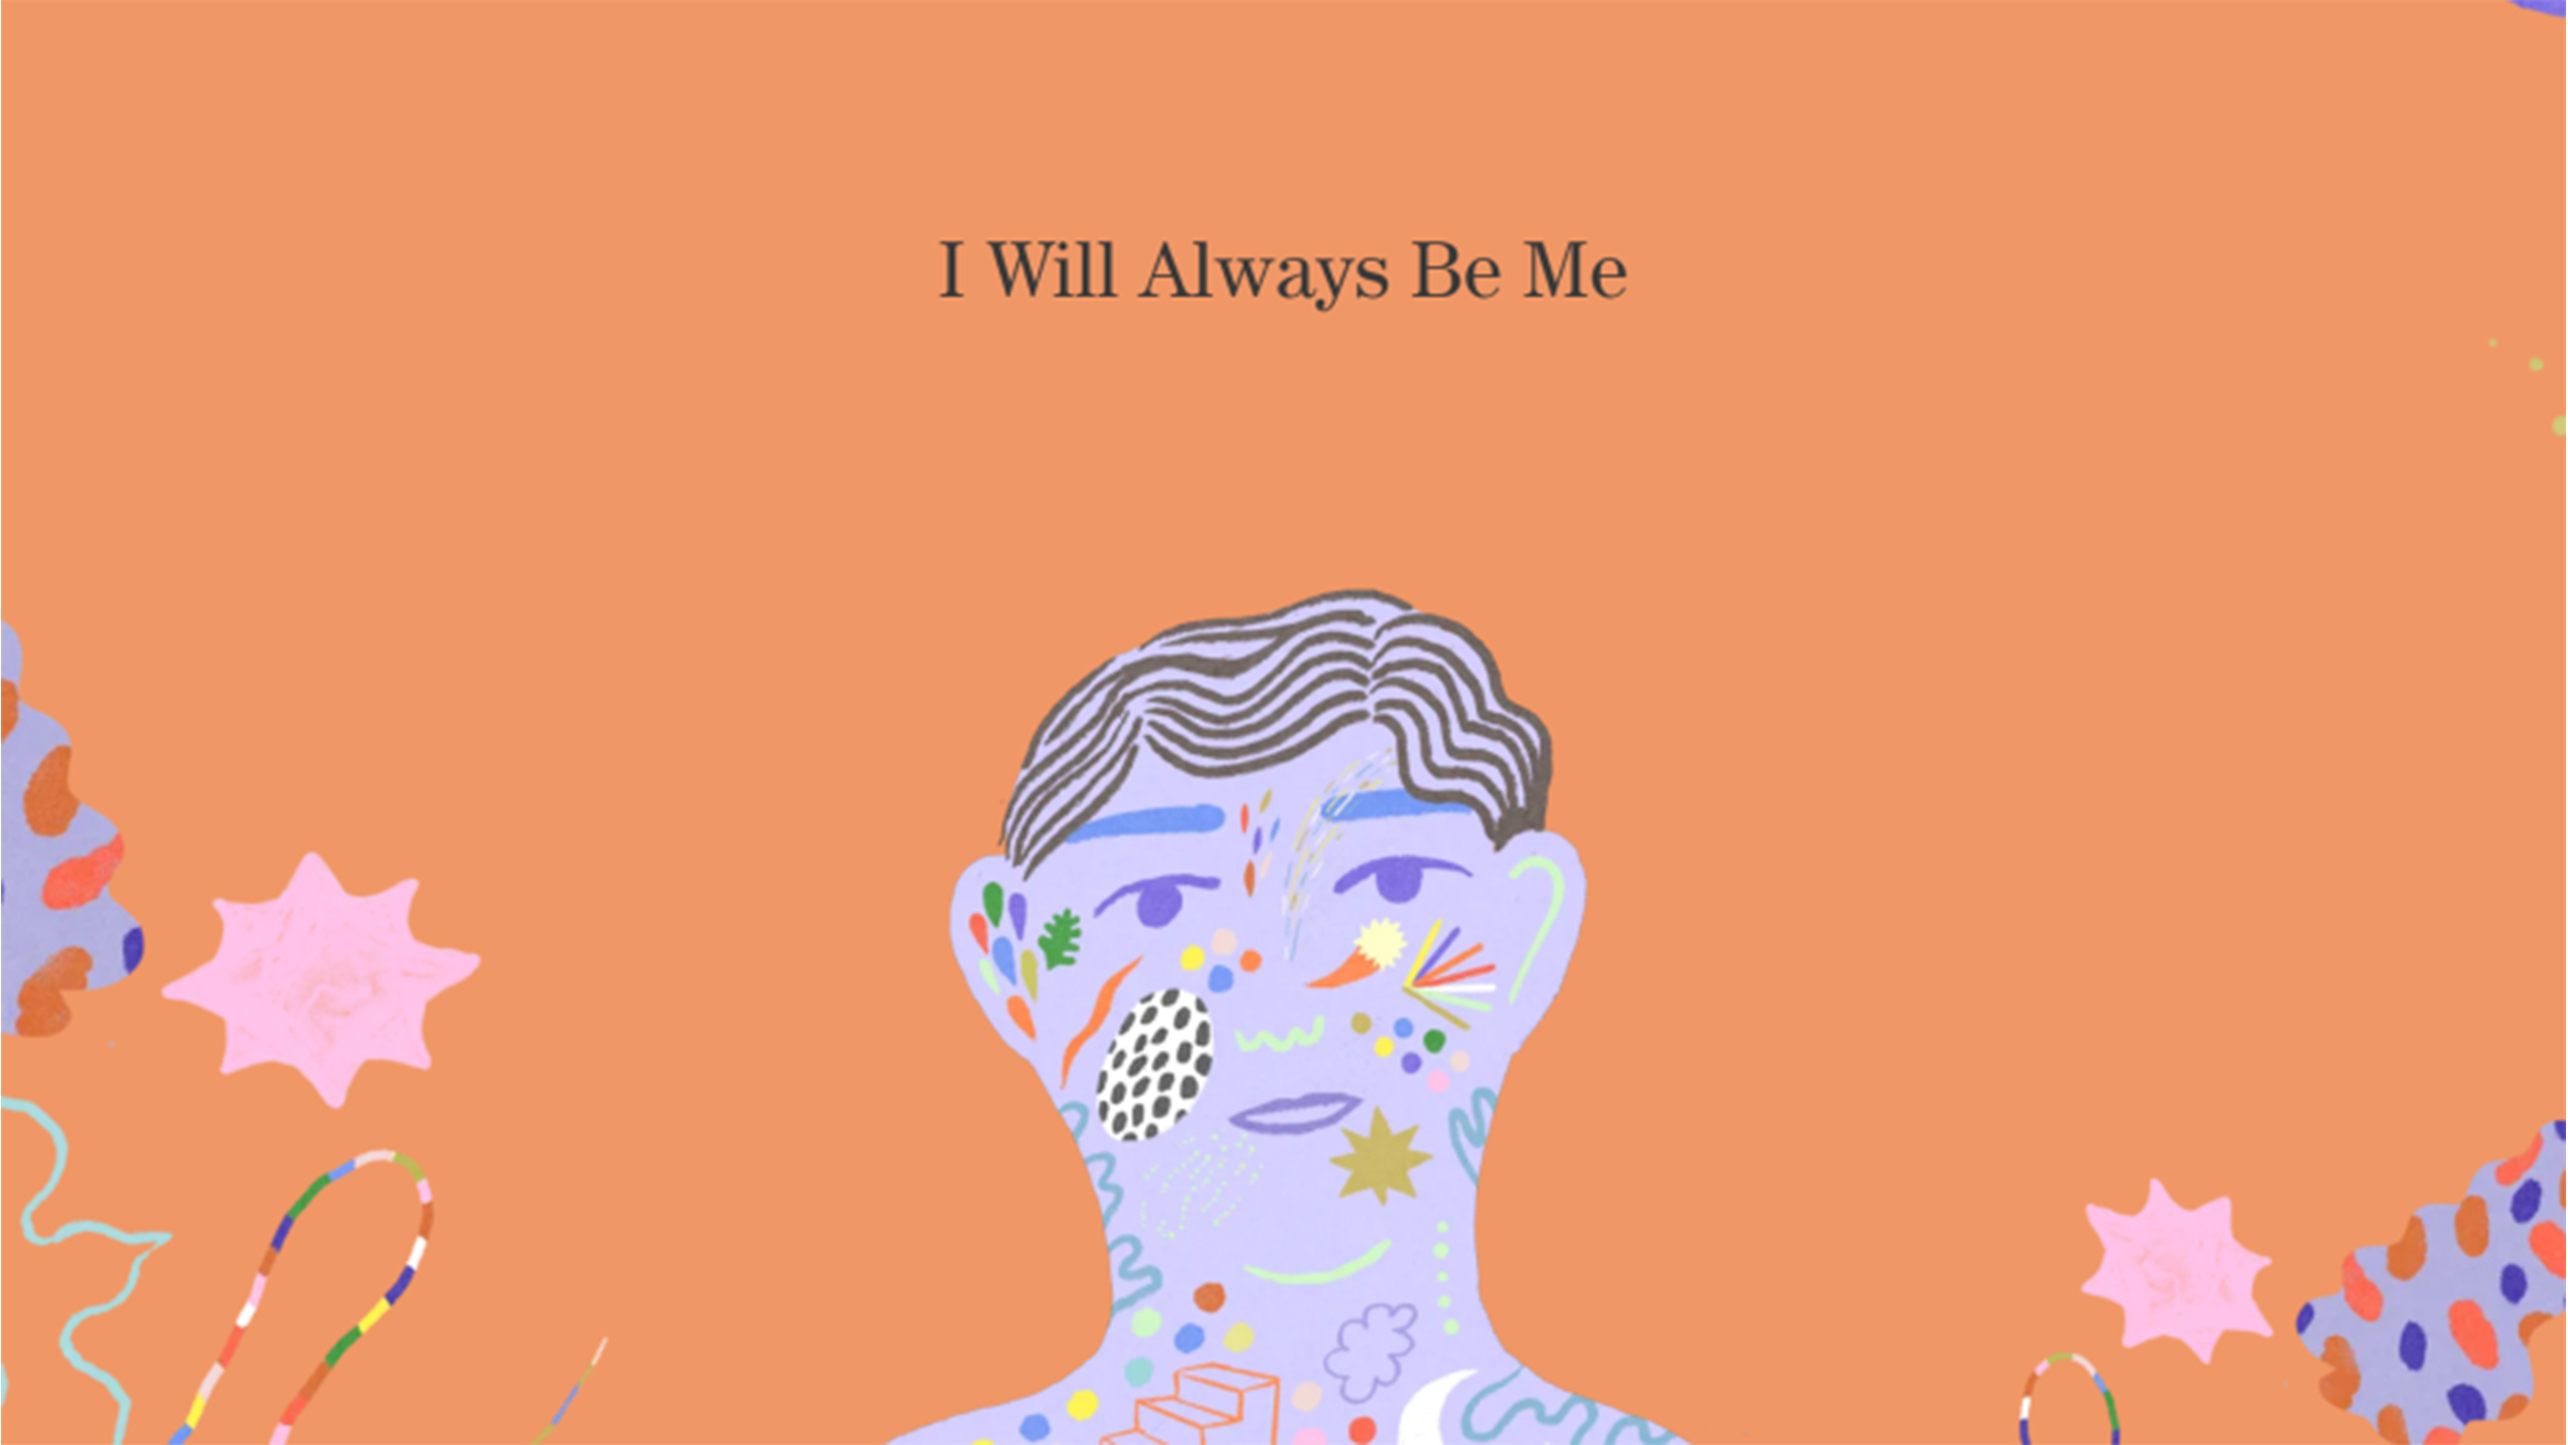 VMLY&R: Dell Technologies and Intel's I Will Always Be Me | WPP